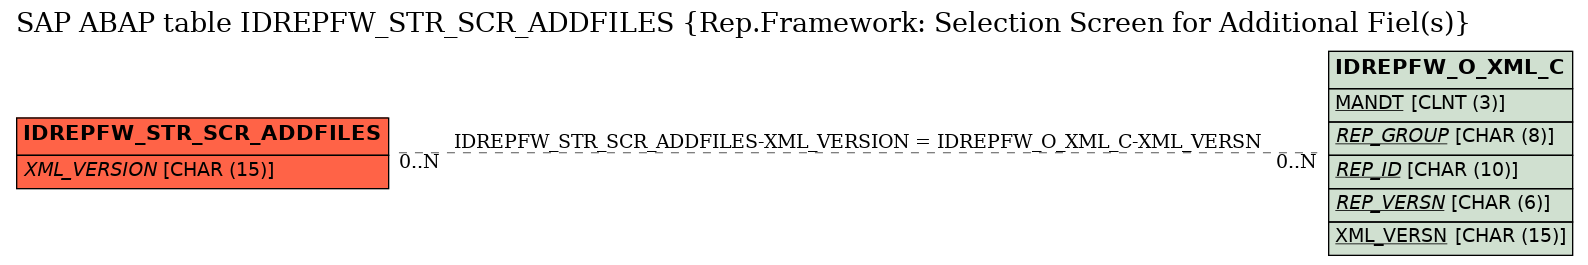 E-R Diagram for table IDREPFW_STR_SCR_ADDFILES (Rep.Framework: Selection Screen for Additional Fiel(s))